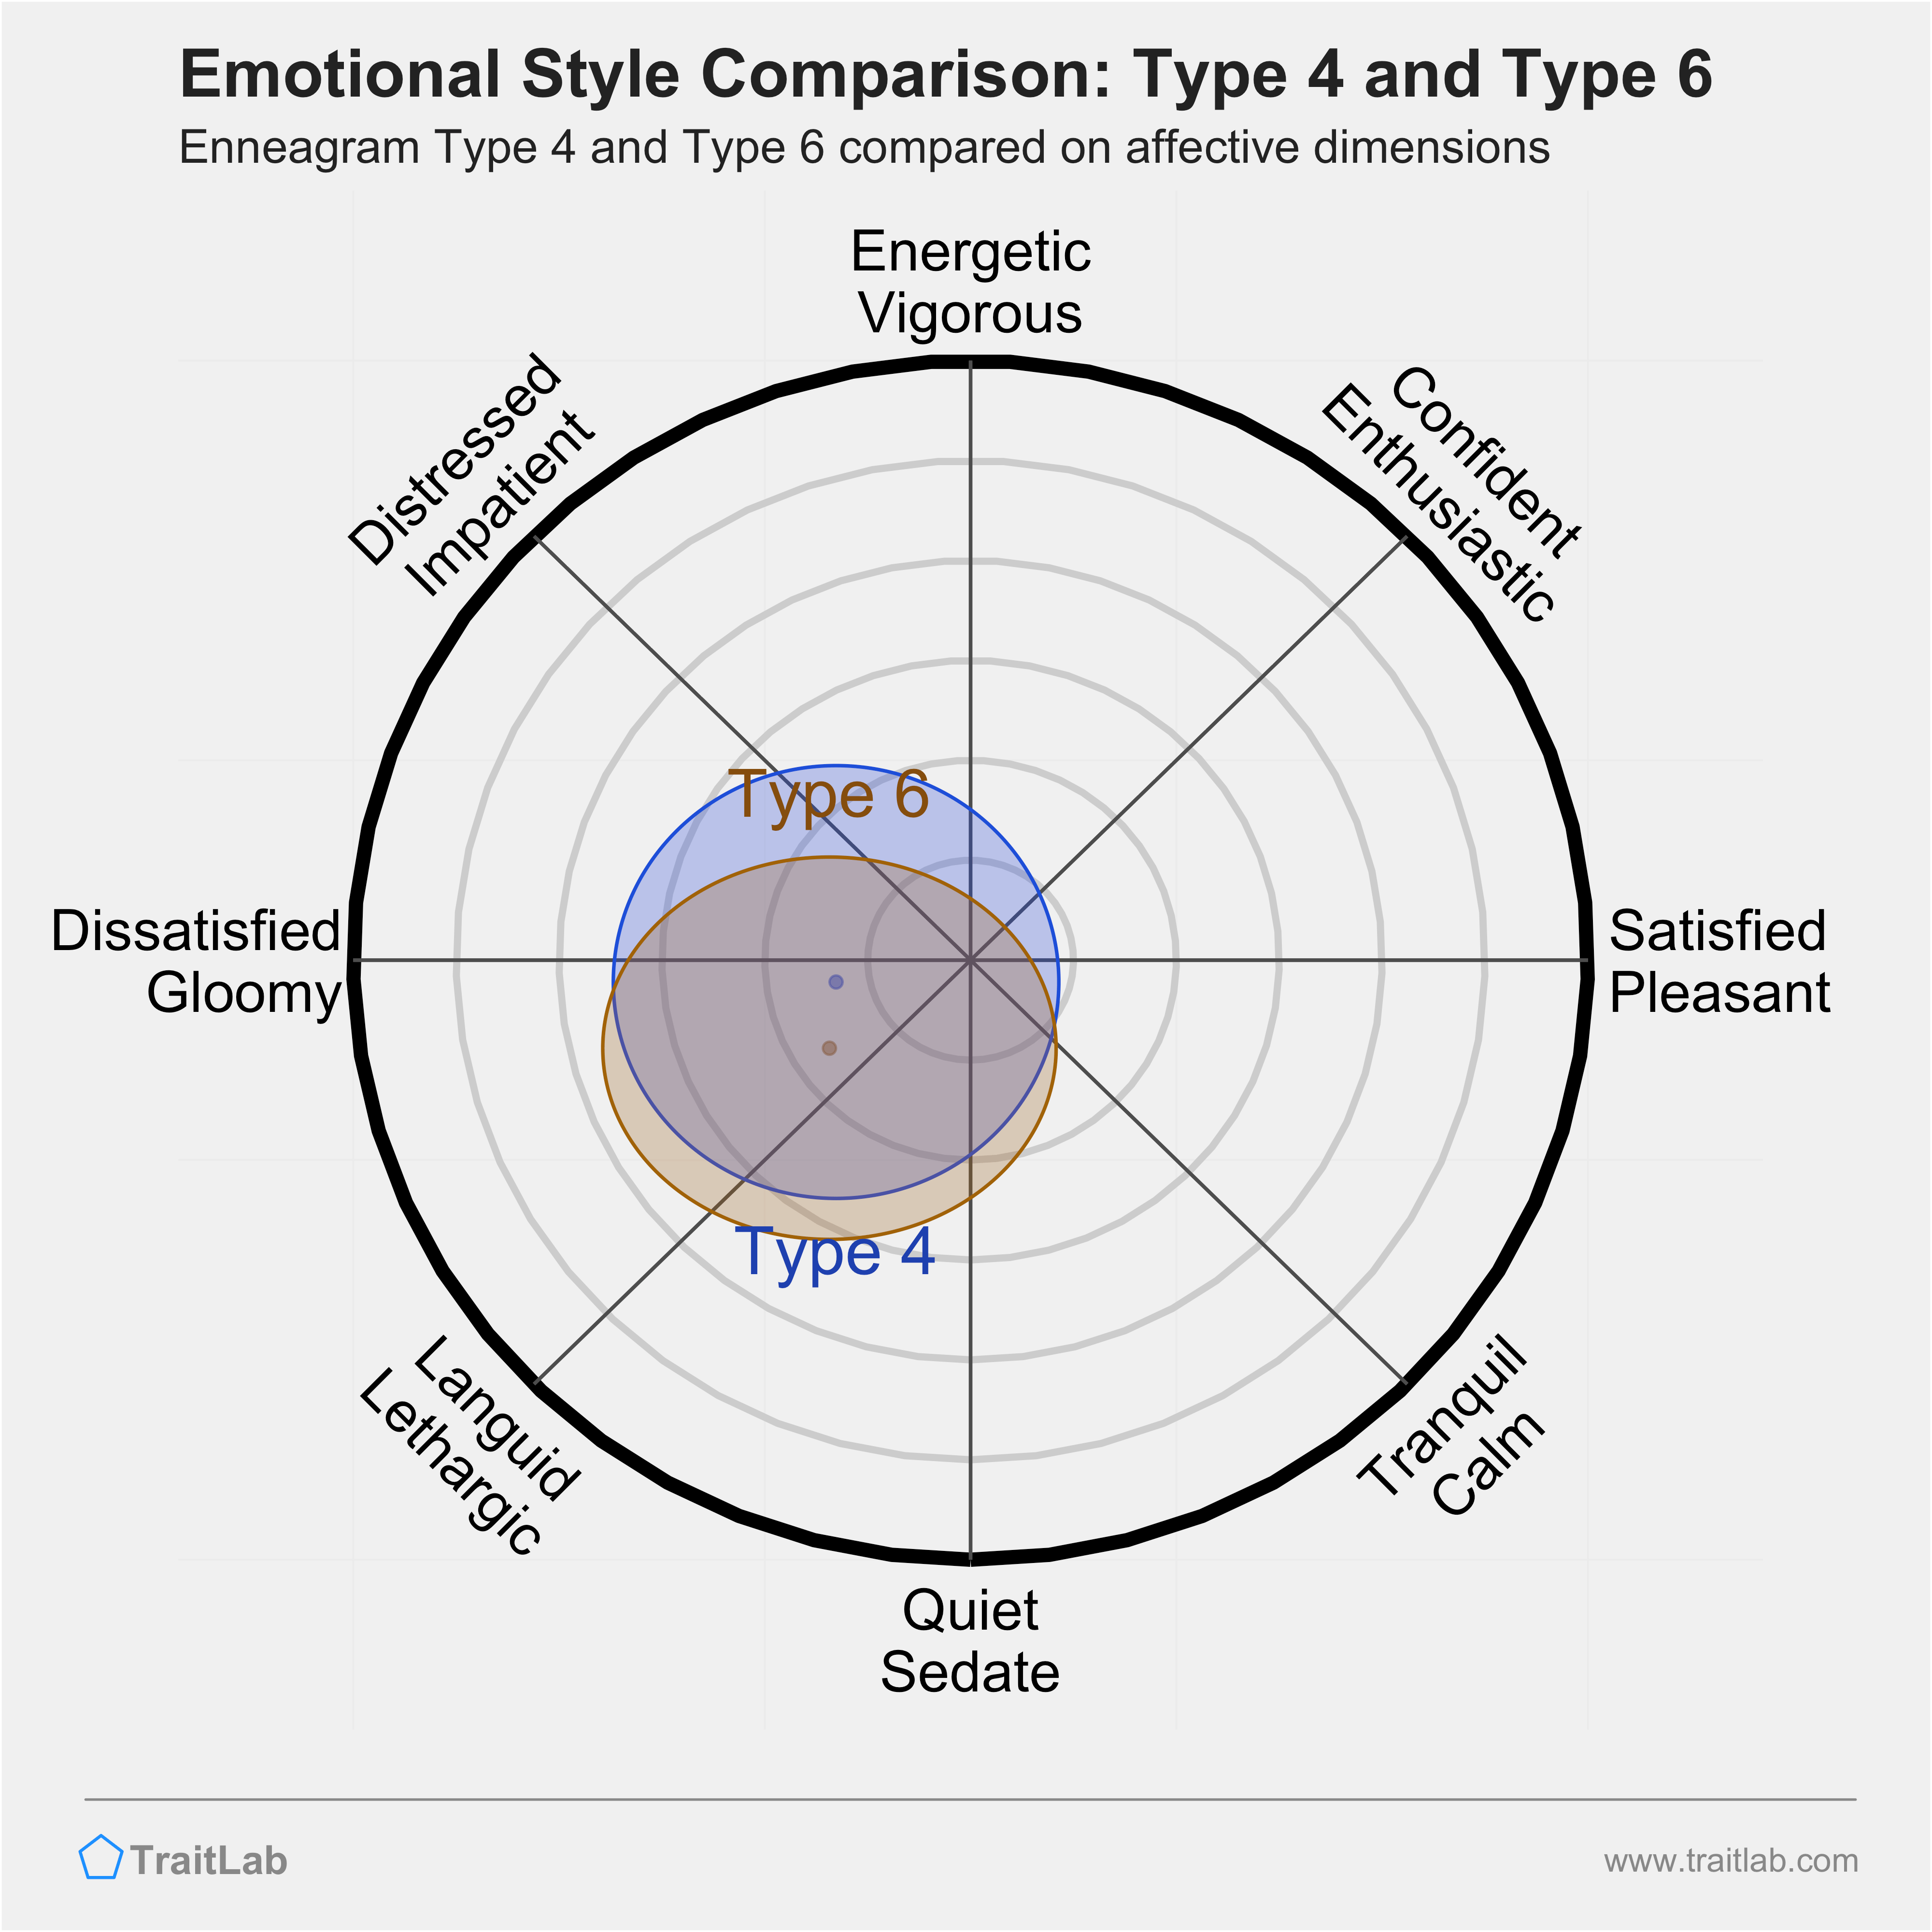 Type 4 and Type 6 comparison across emotional (affective) dimensions